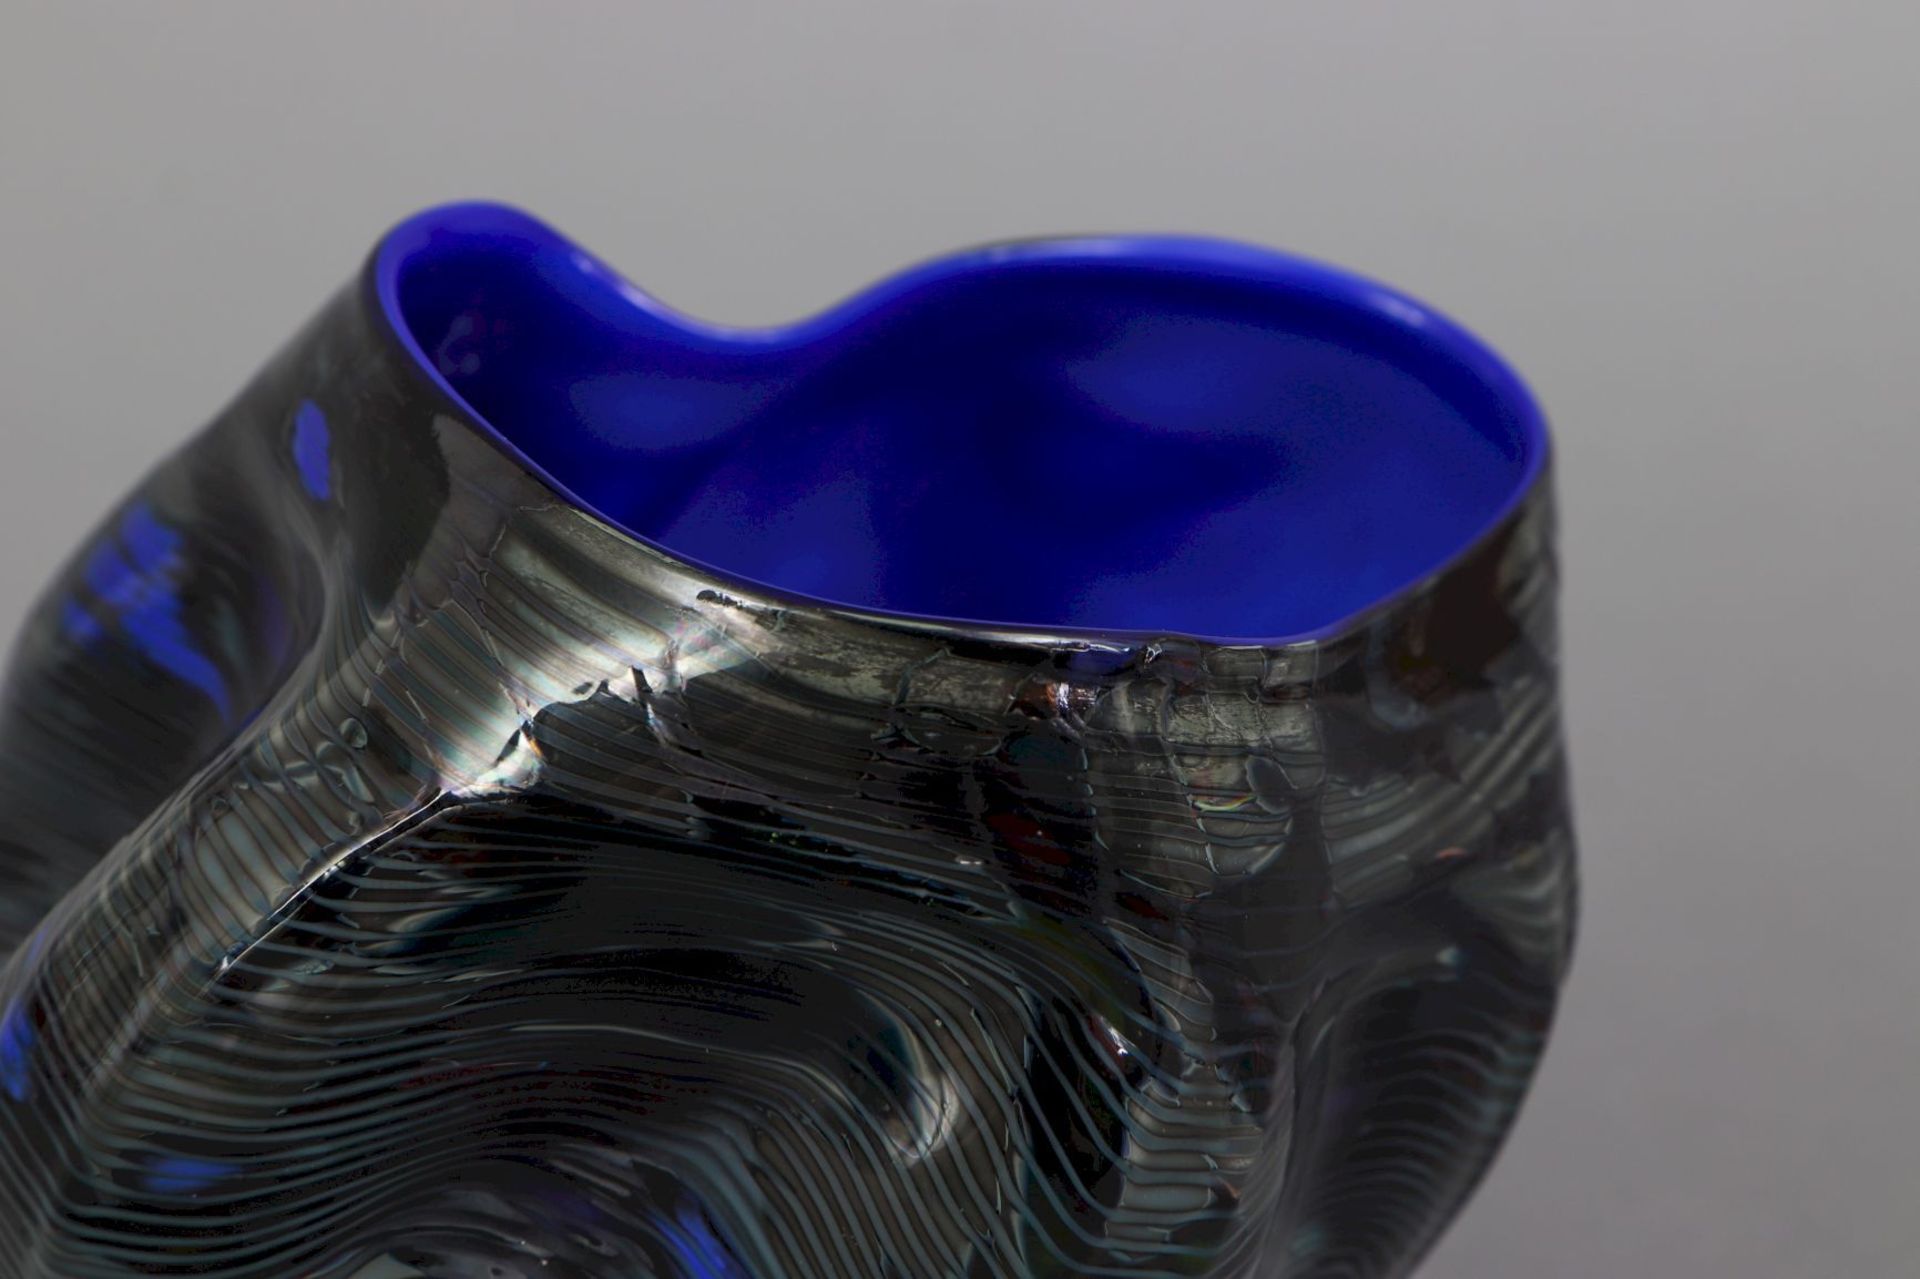 Dale Patrick CHIHULY (1941), Glasschale ¨Blue Macchia¨ - Image 4 of 5